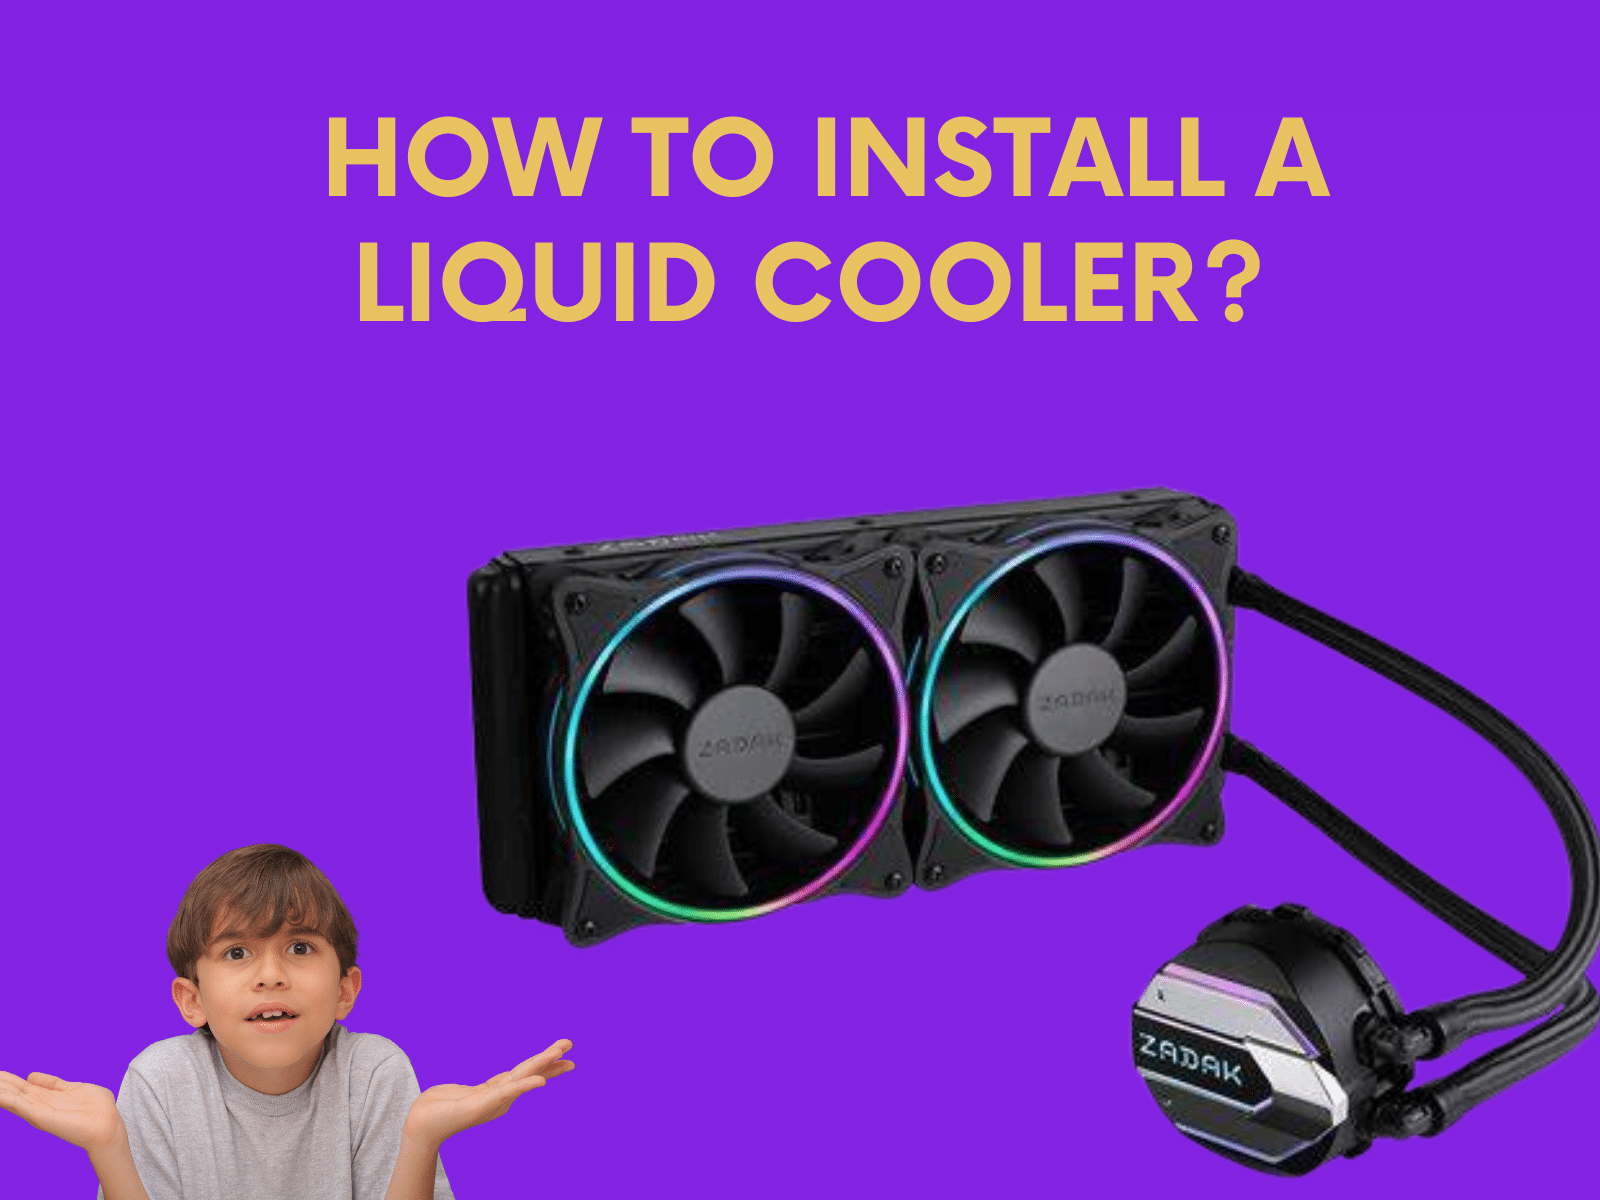 How To Install A Liquid Cooler